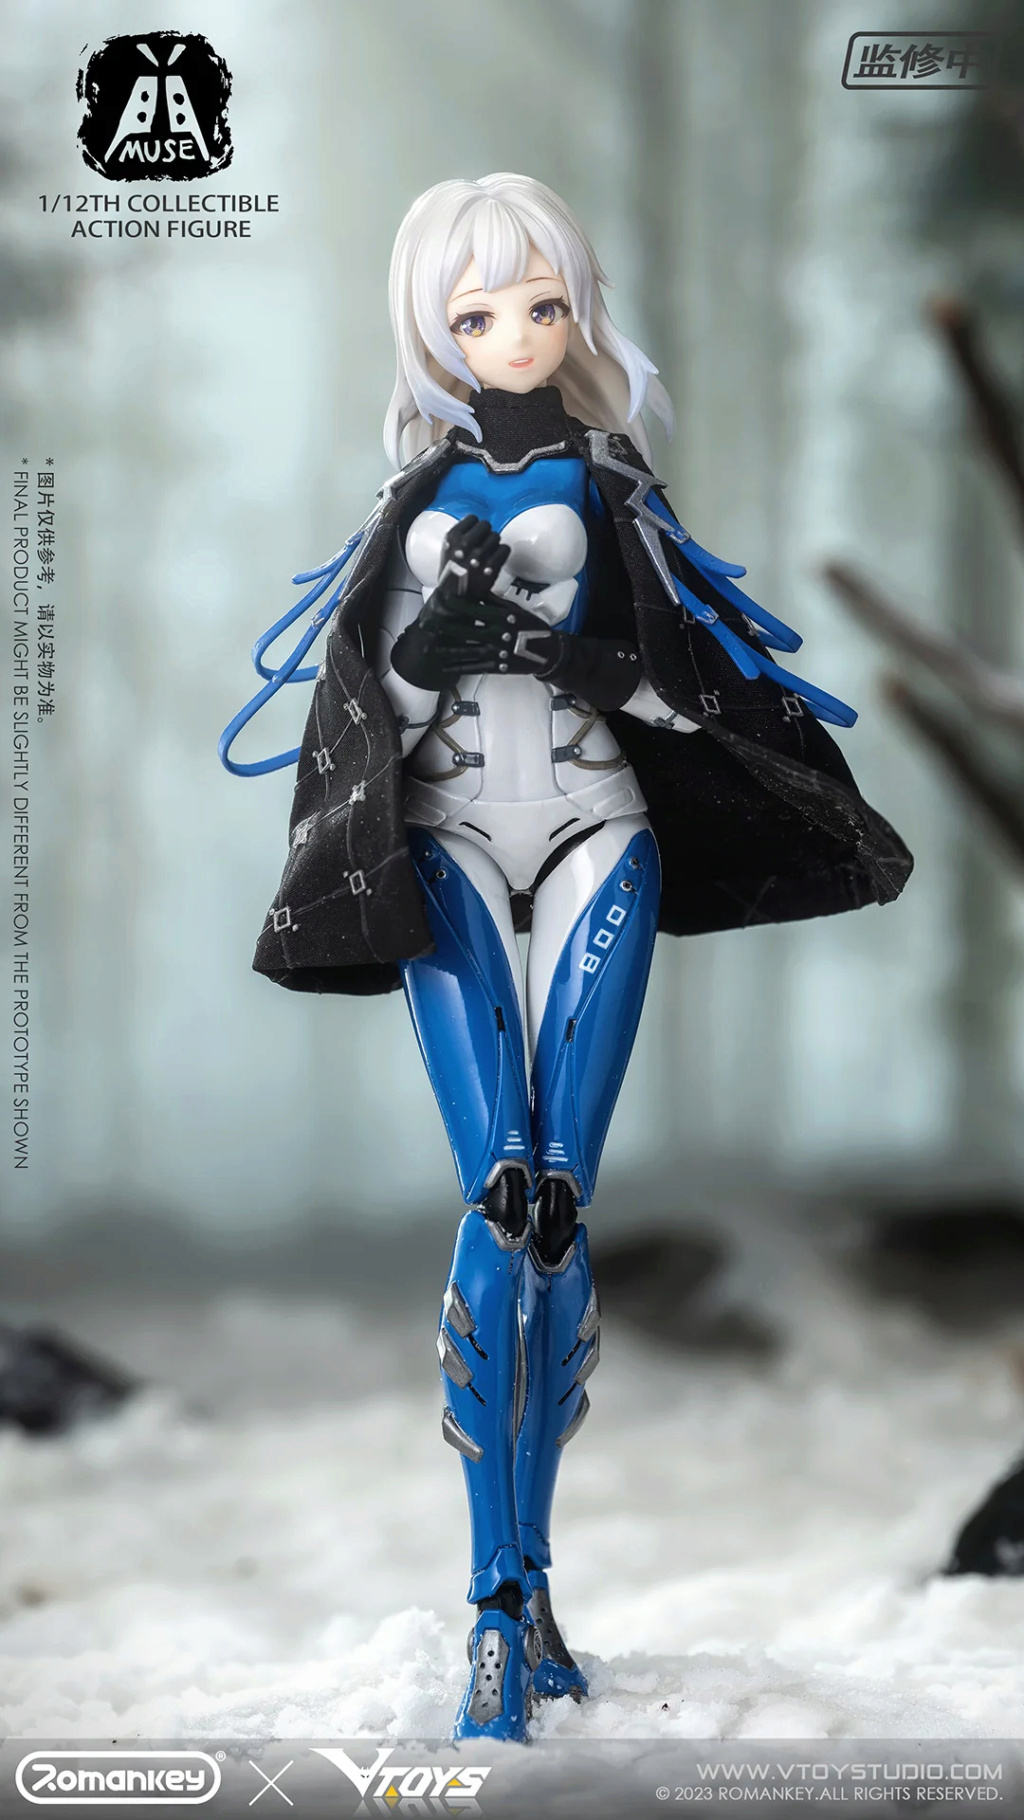 NEW PRODUCT: VTOYS x Romankey 1/12 Scale Muse 04_5ac10